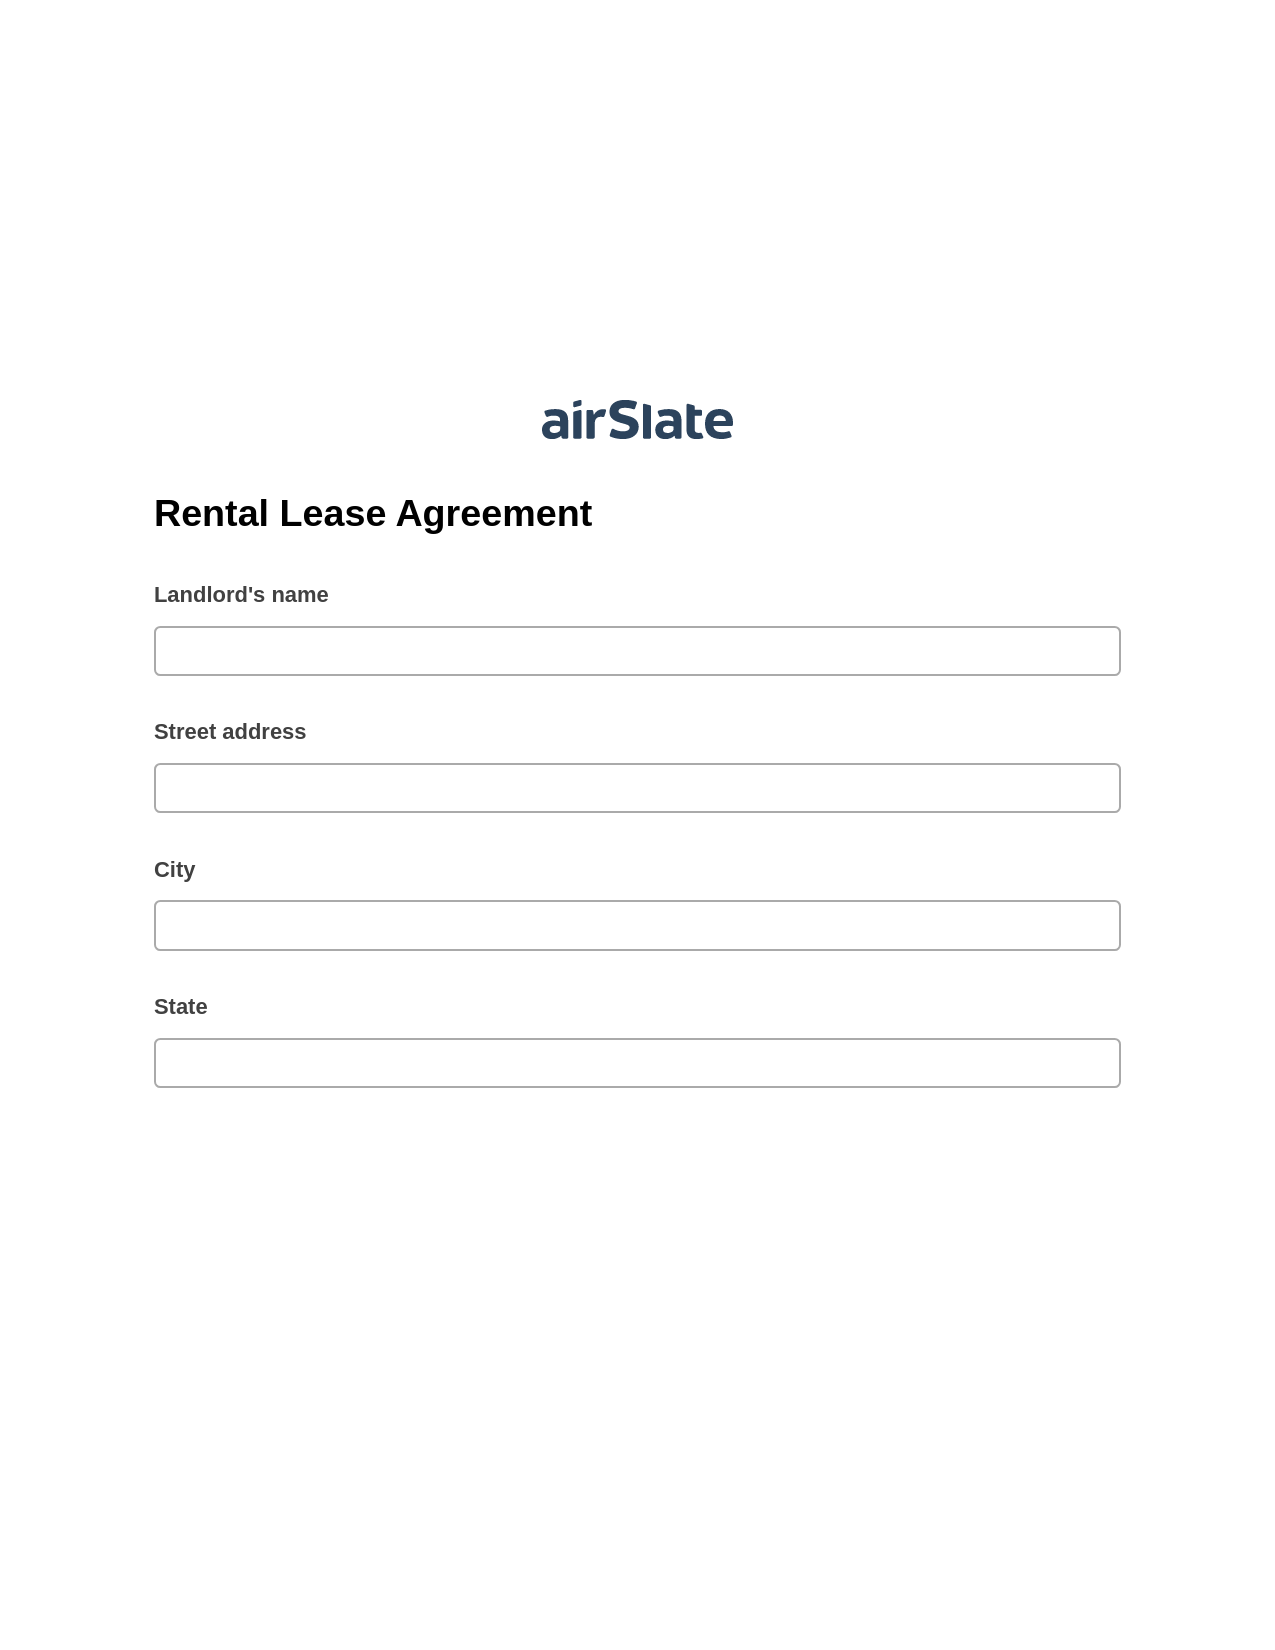 Rental Lease Agreement Pre-fill Dropdown from Airtable, Email Notification Bot, Export to NetSuite Record Bot